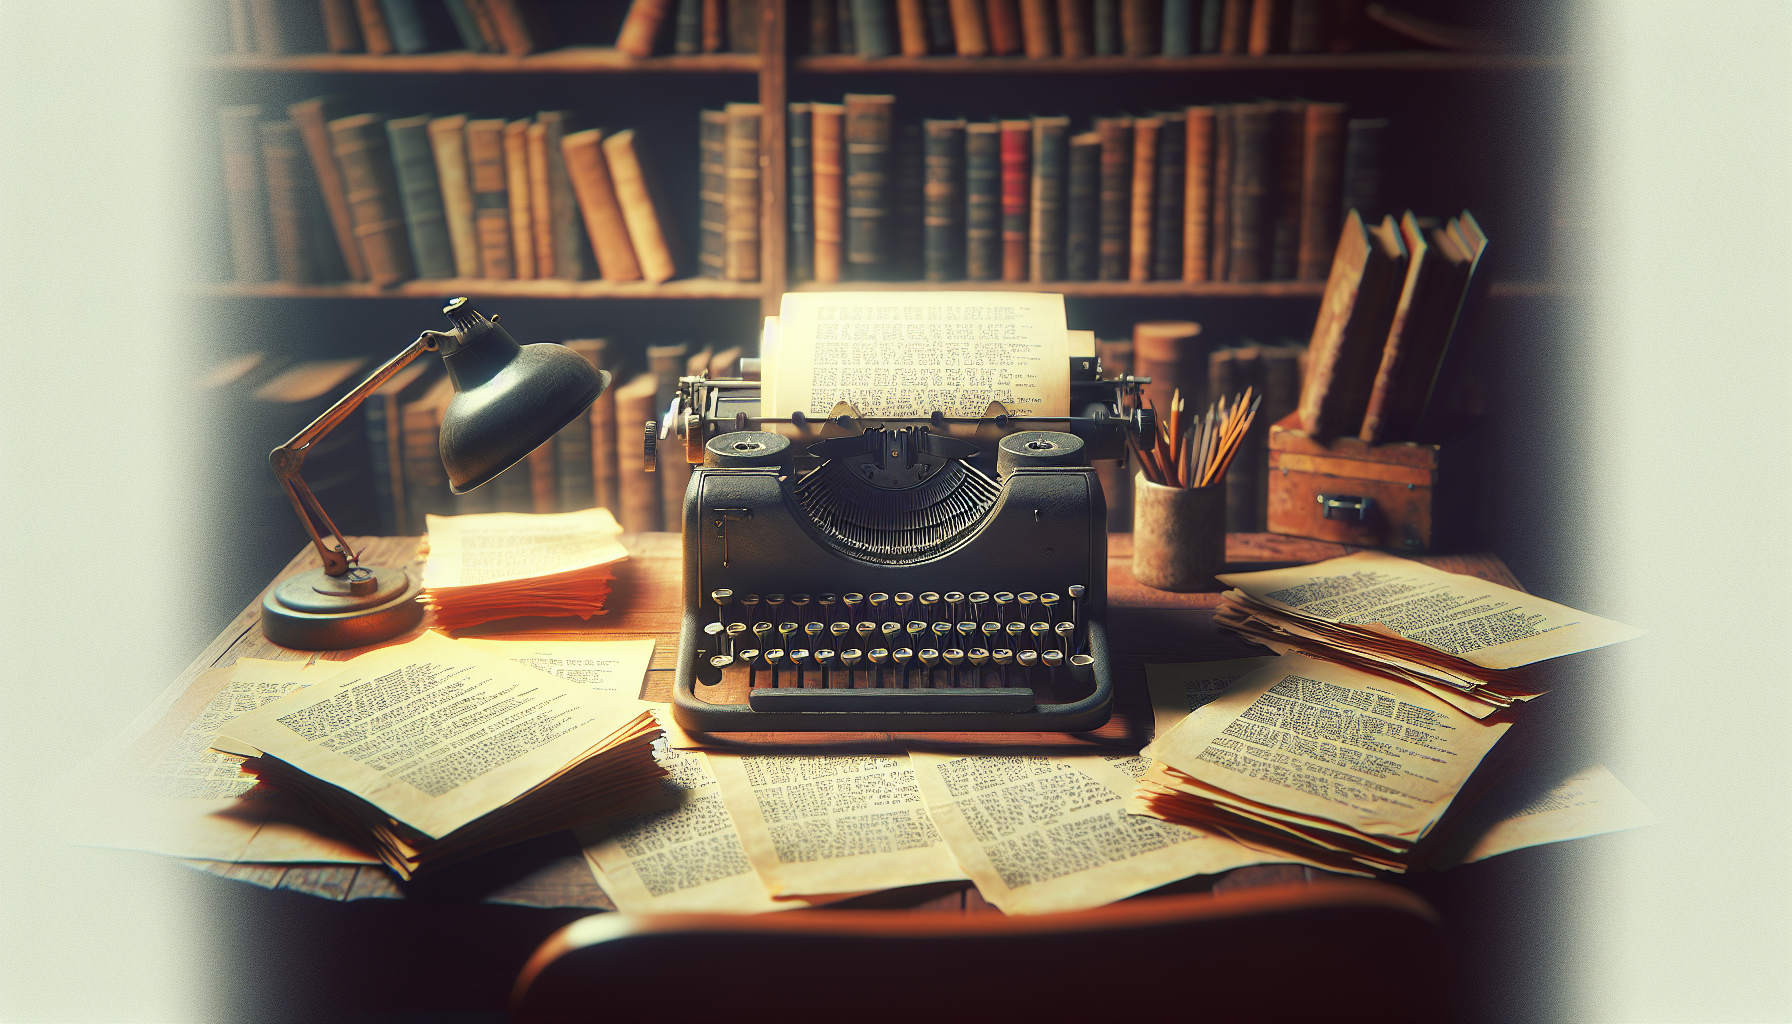 A vintage typewriter on a wooden desk, surrounded by scattered screenplay pages filled with formatted dialogue, with a soft-focus background of a cozy, dimly-lit writer's study.